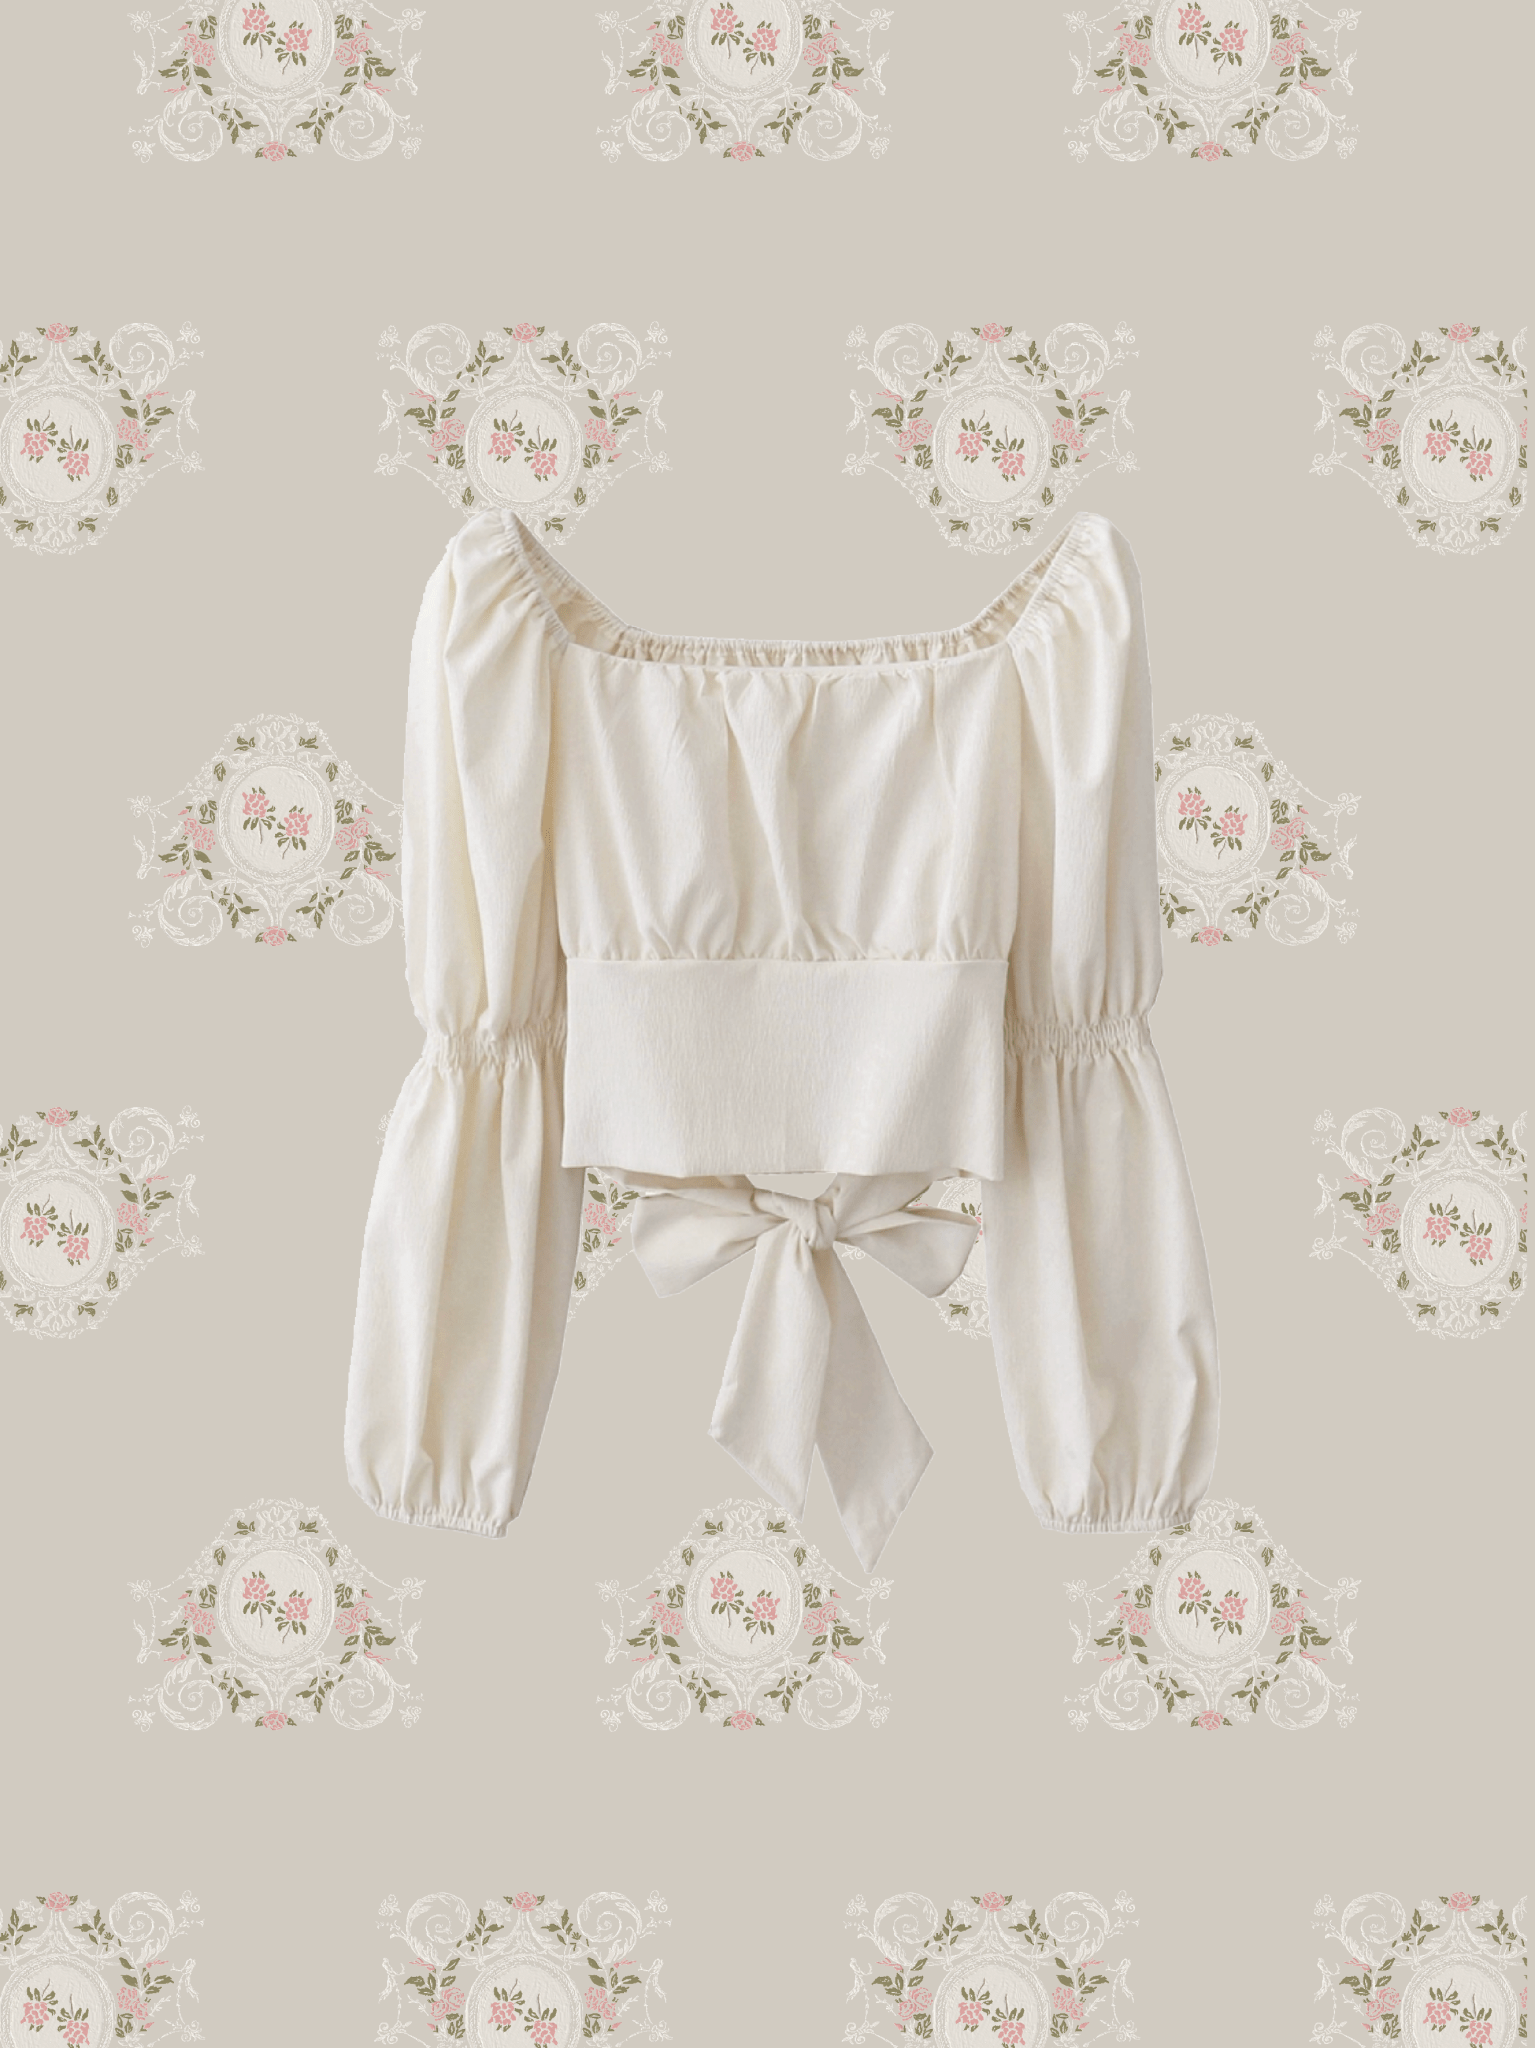 French Square Collar High-waisted Top - LOVE POMME POMME